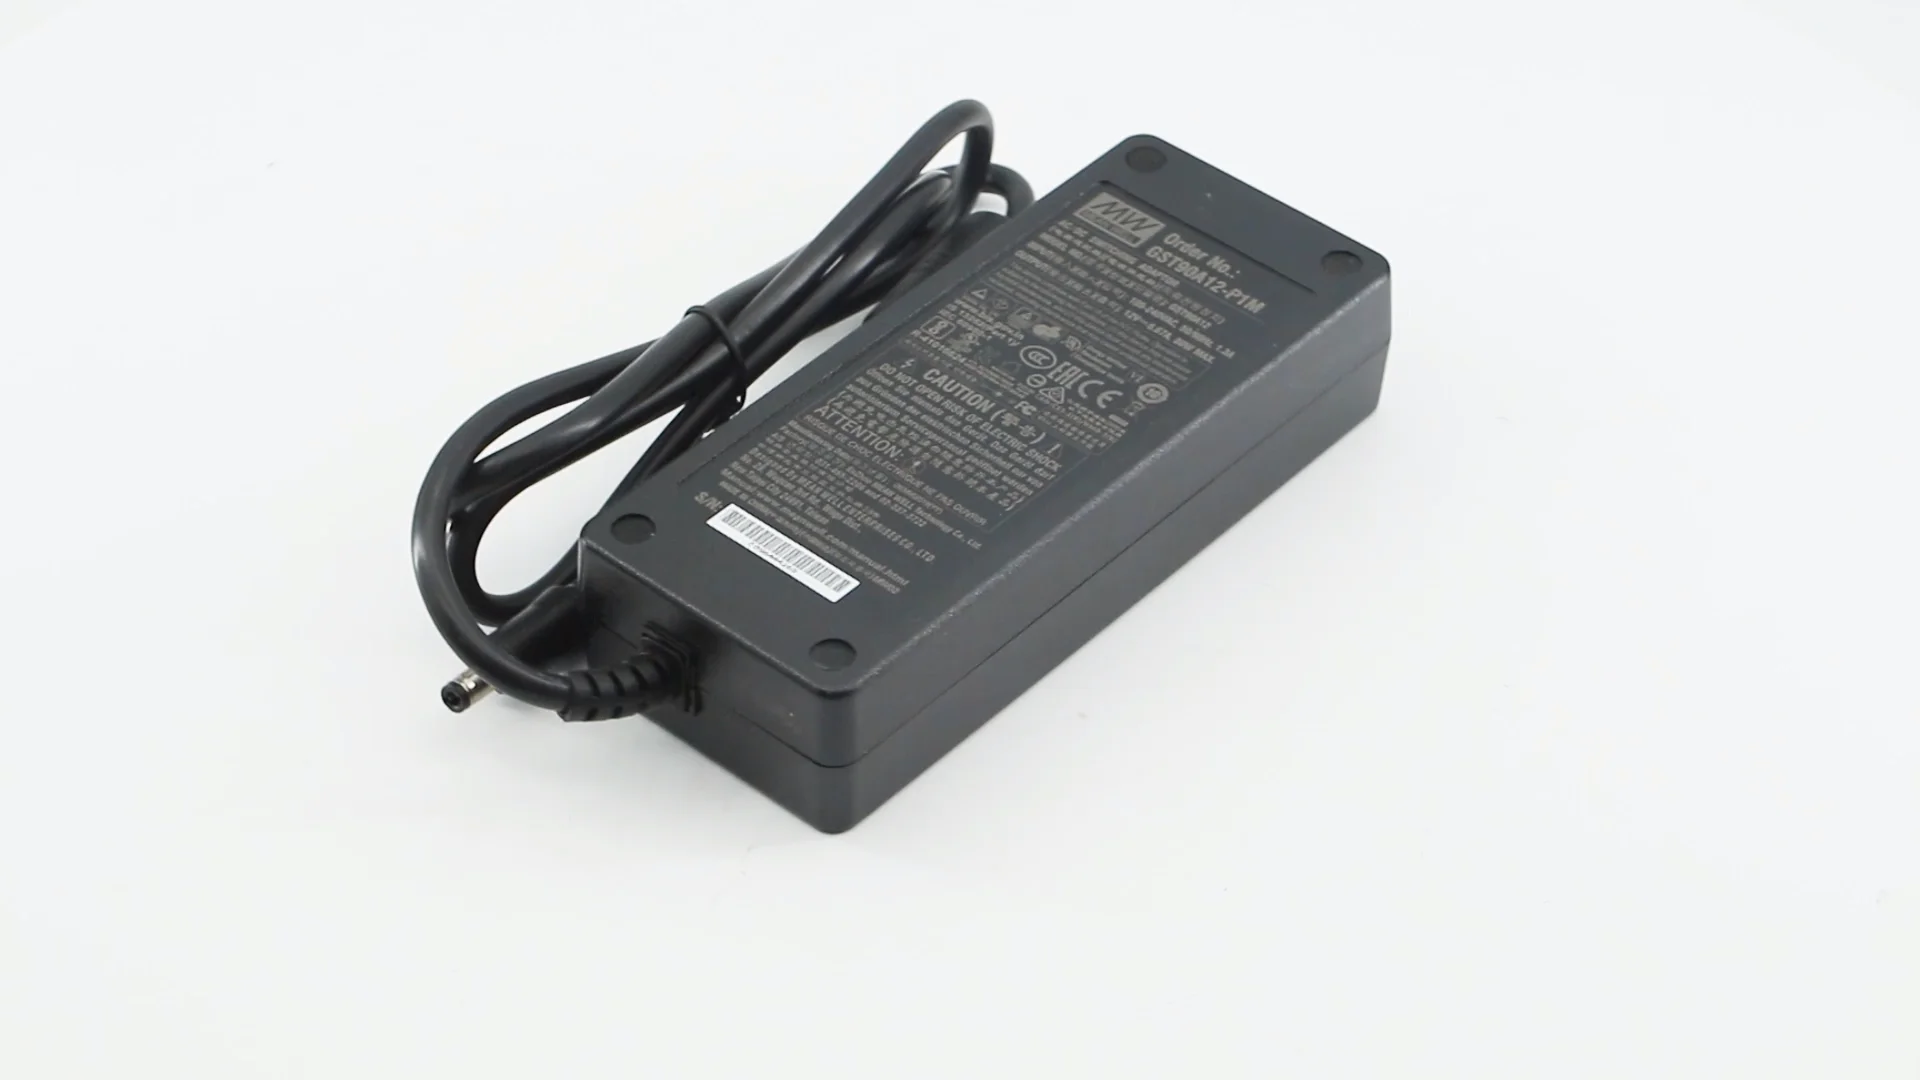 it can Compliment moron Mean Well 90w 12v 6.67a Plastic Case Power Adaptor Universal Ac Dc Adaptor  Gst90a12-p1m - Buy Switching Power Supply Adapter,Led Driver Adapter,90w Ac  Dc Adapter Power Supply Product on Alibaba.com